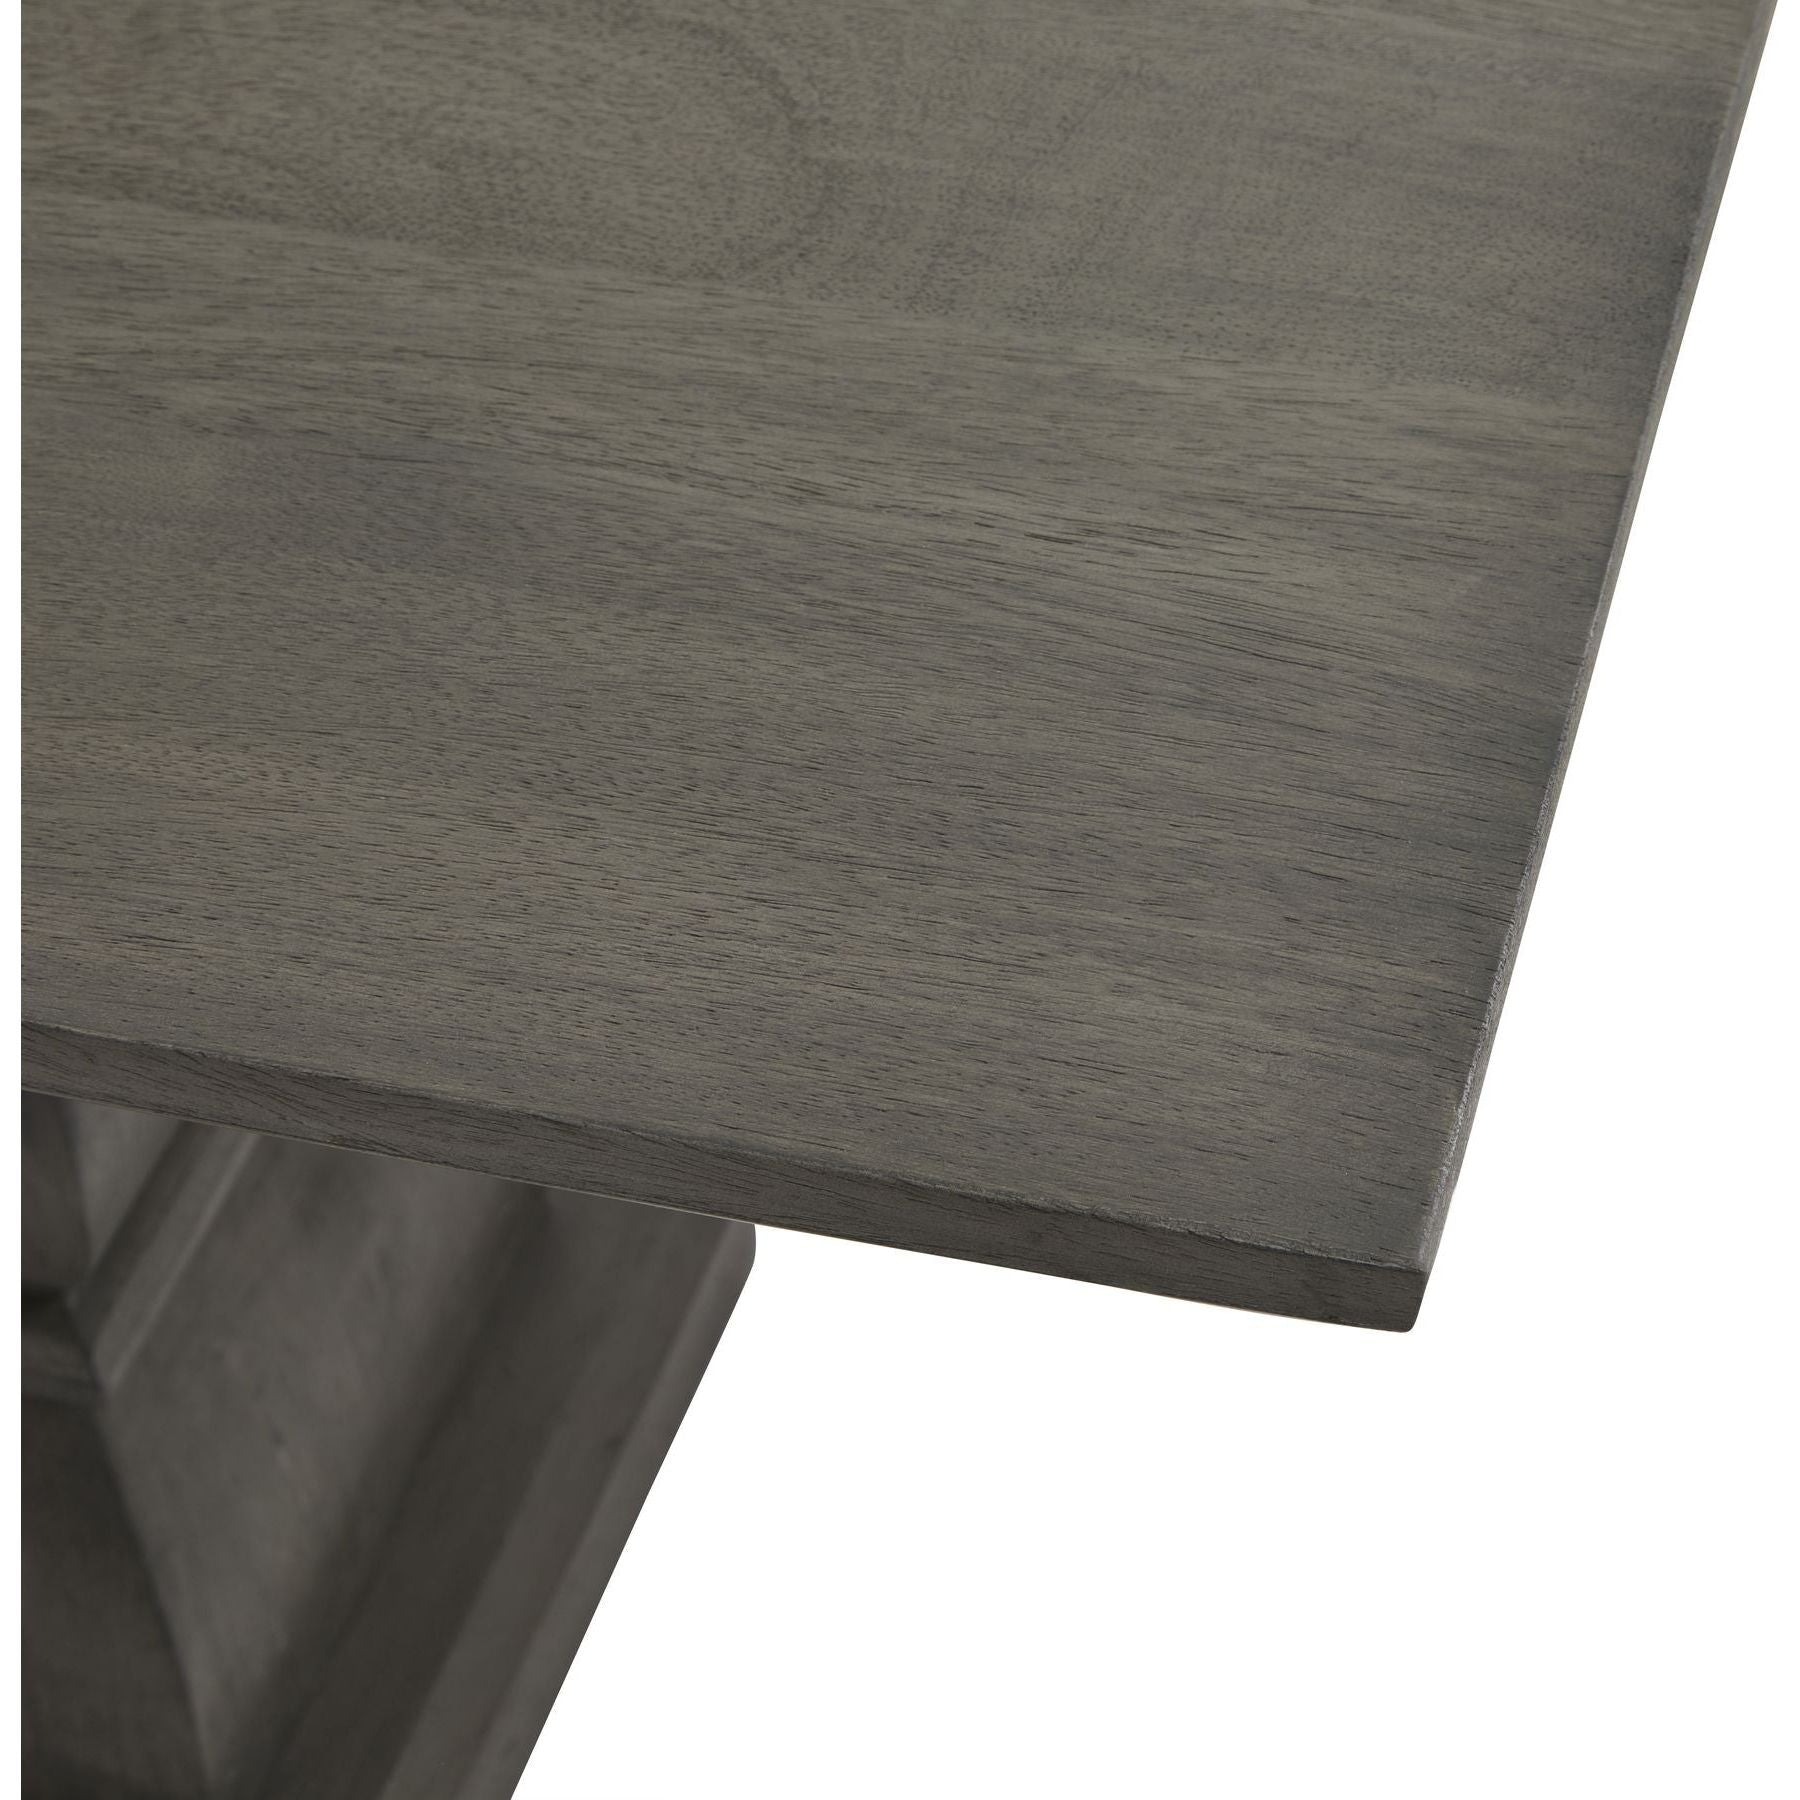 Lucia Collection Dining Table - Ashton and Finch